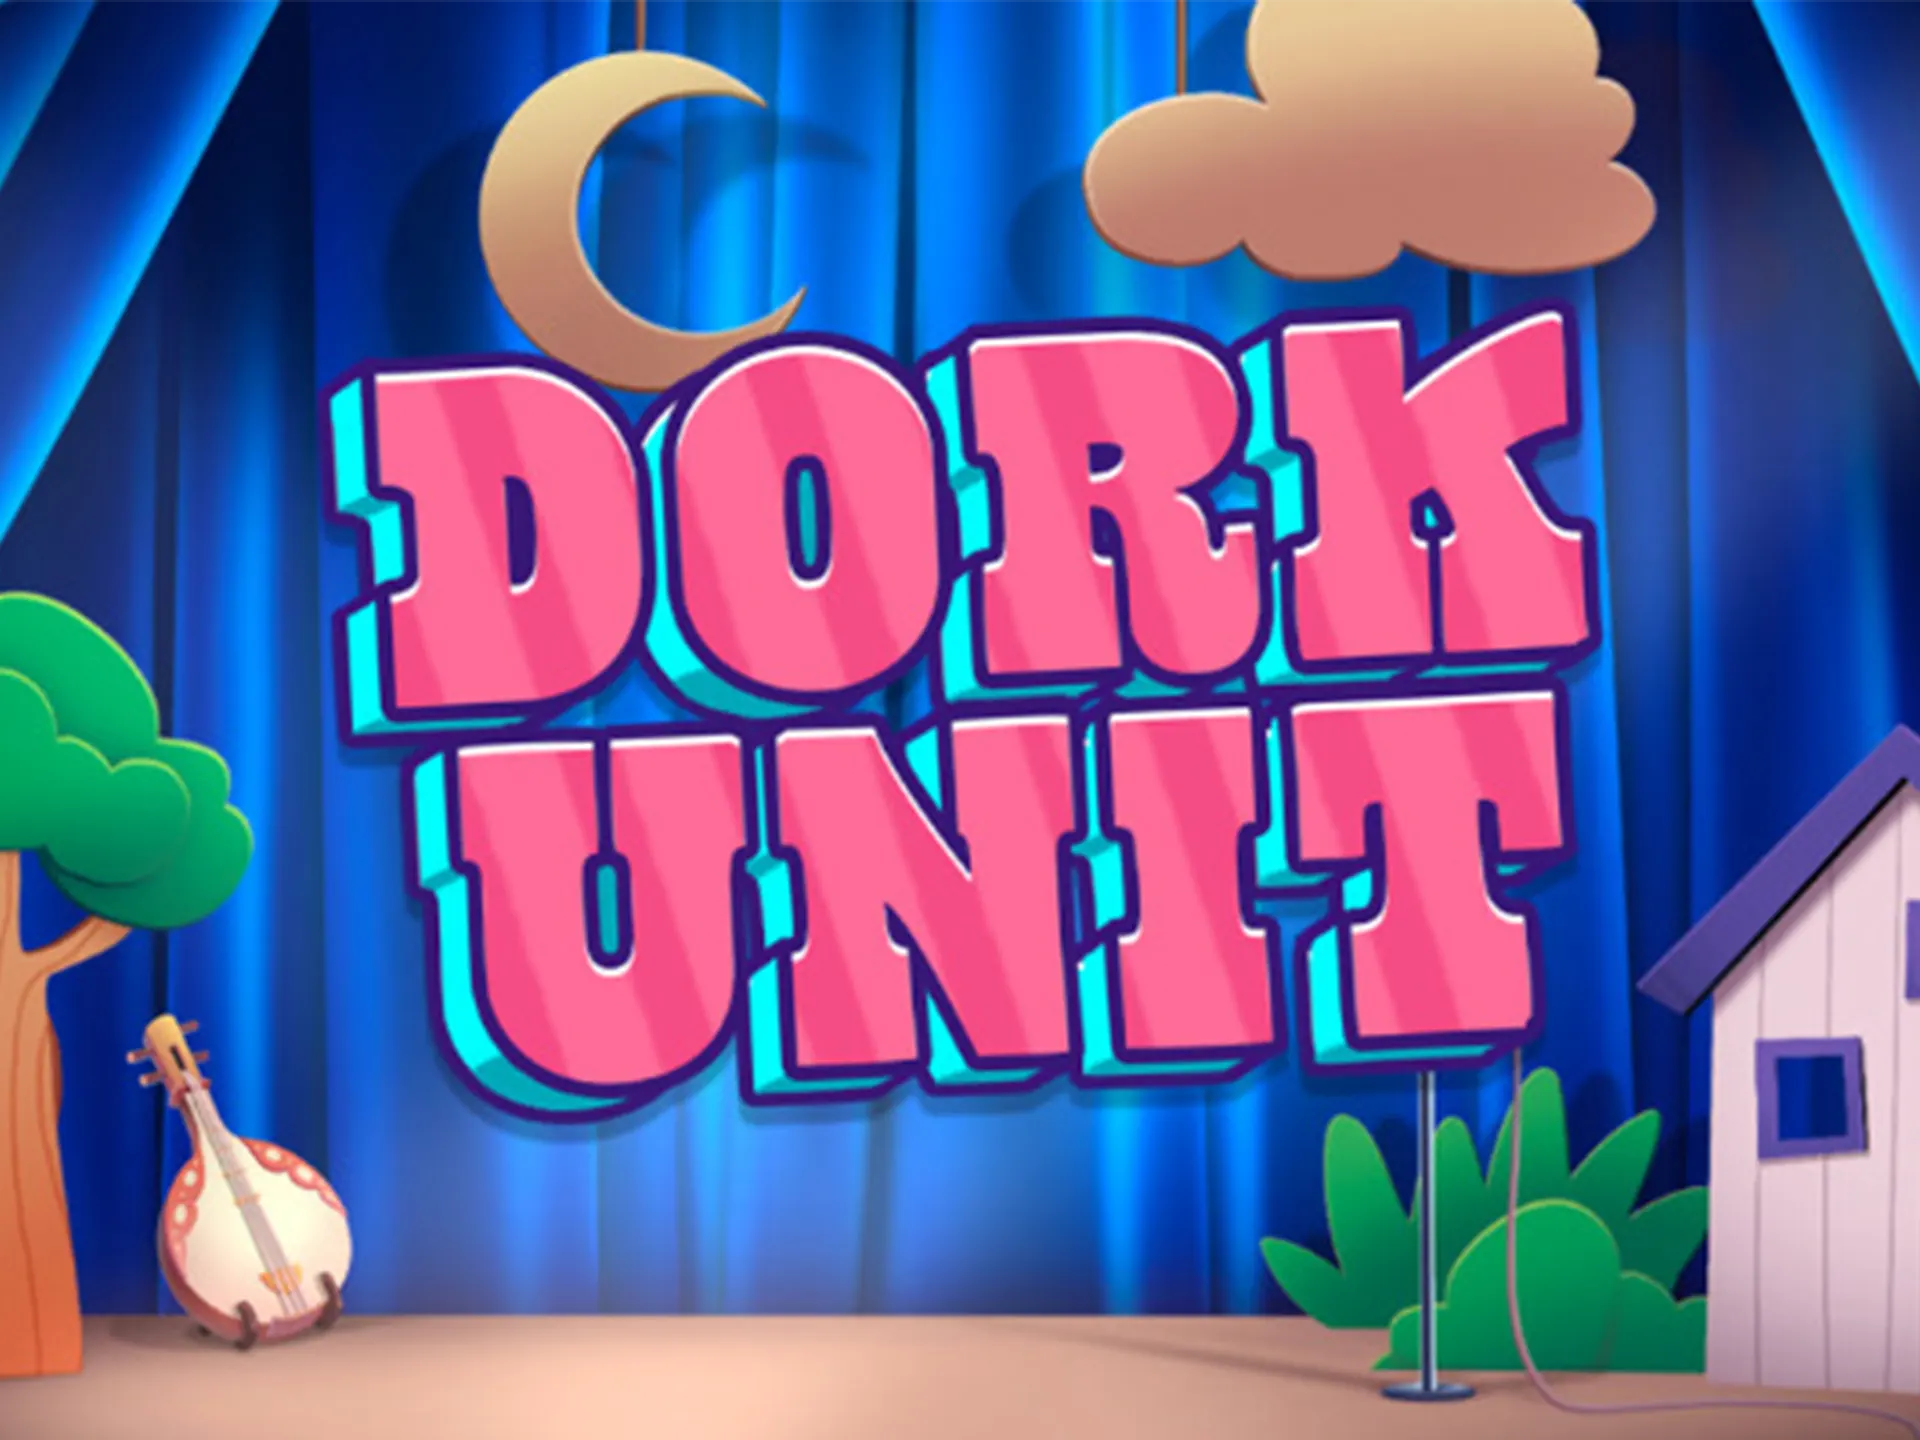 Play Dork Unit slot and have fun.